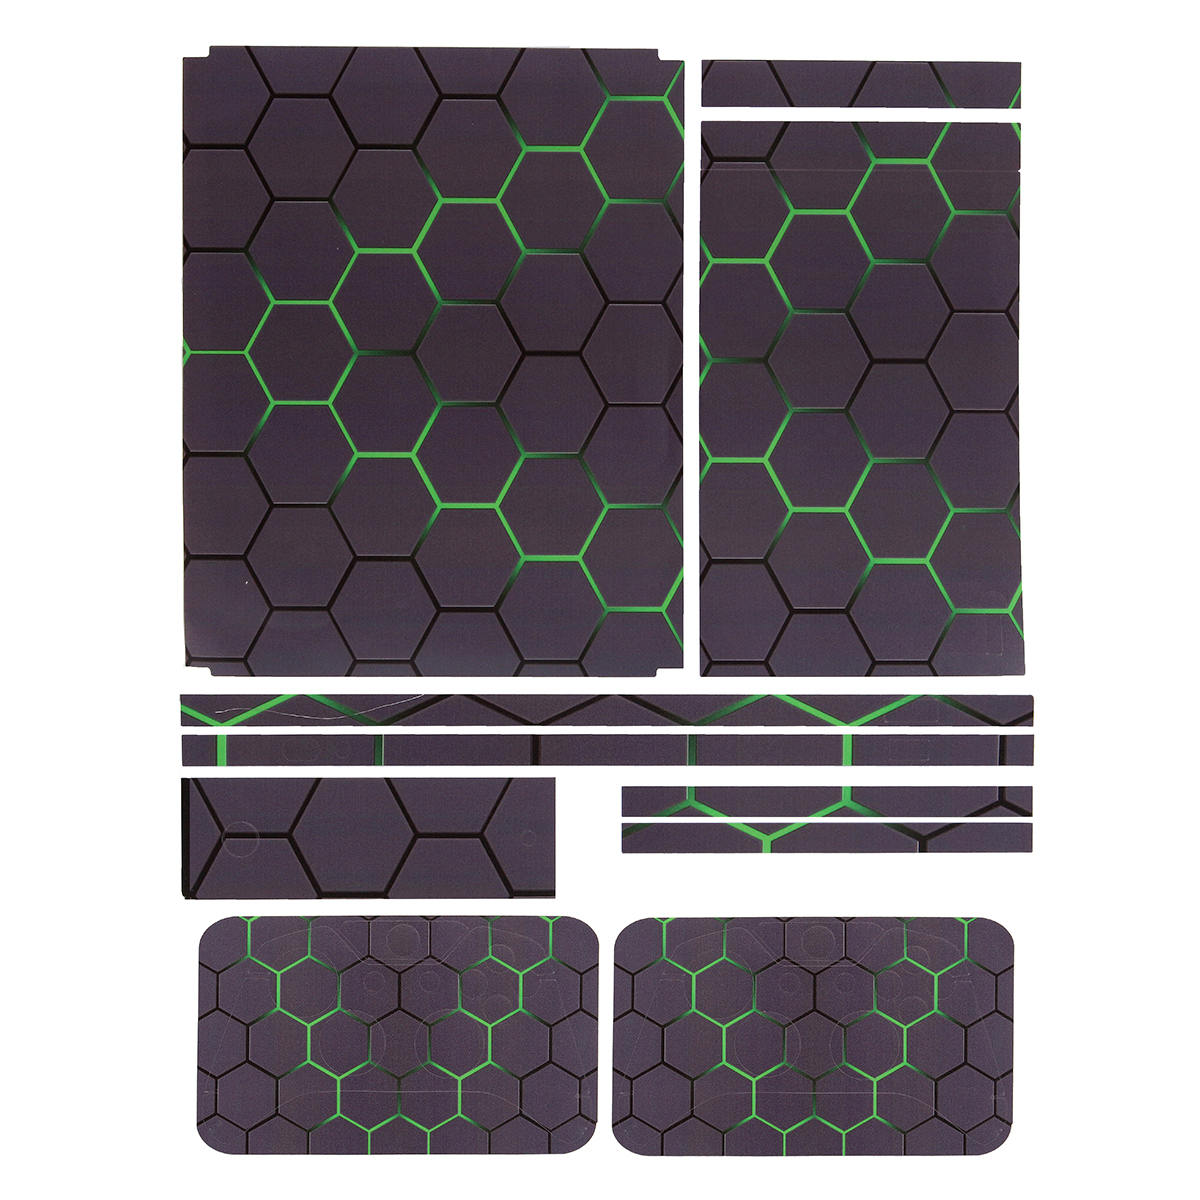 Green Grid Vinyl Decal Skin Stickers Cover for Xbox One S Game Console&2 Controllers 15